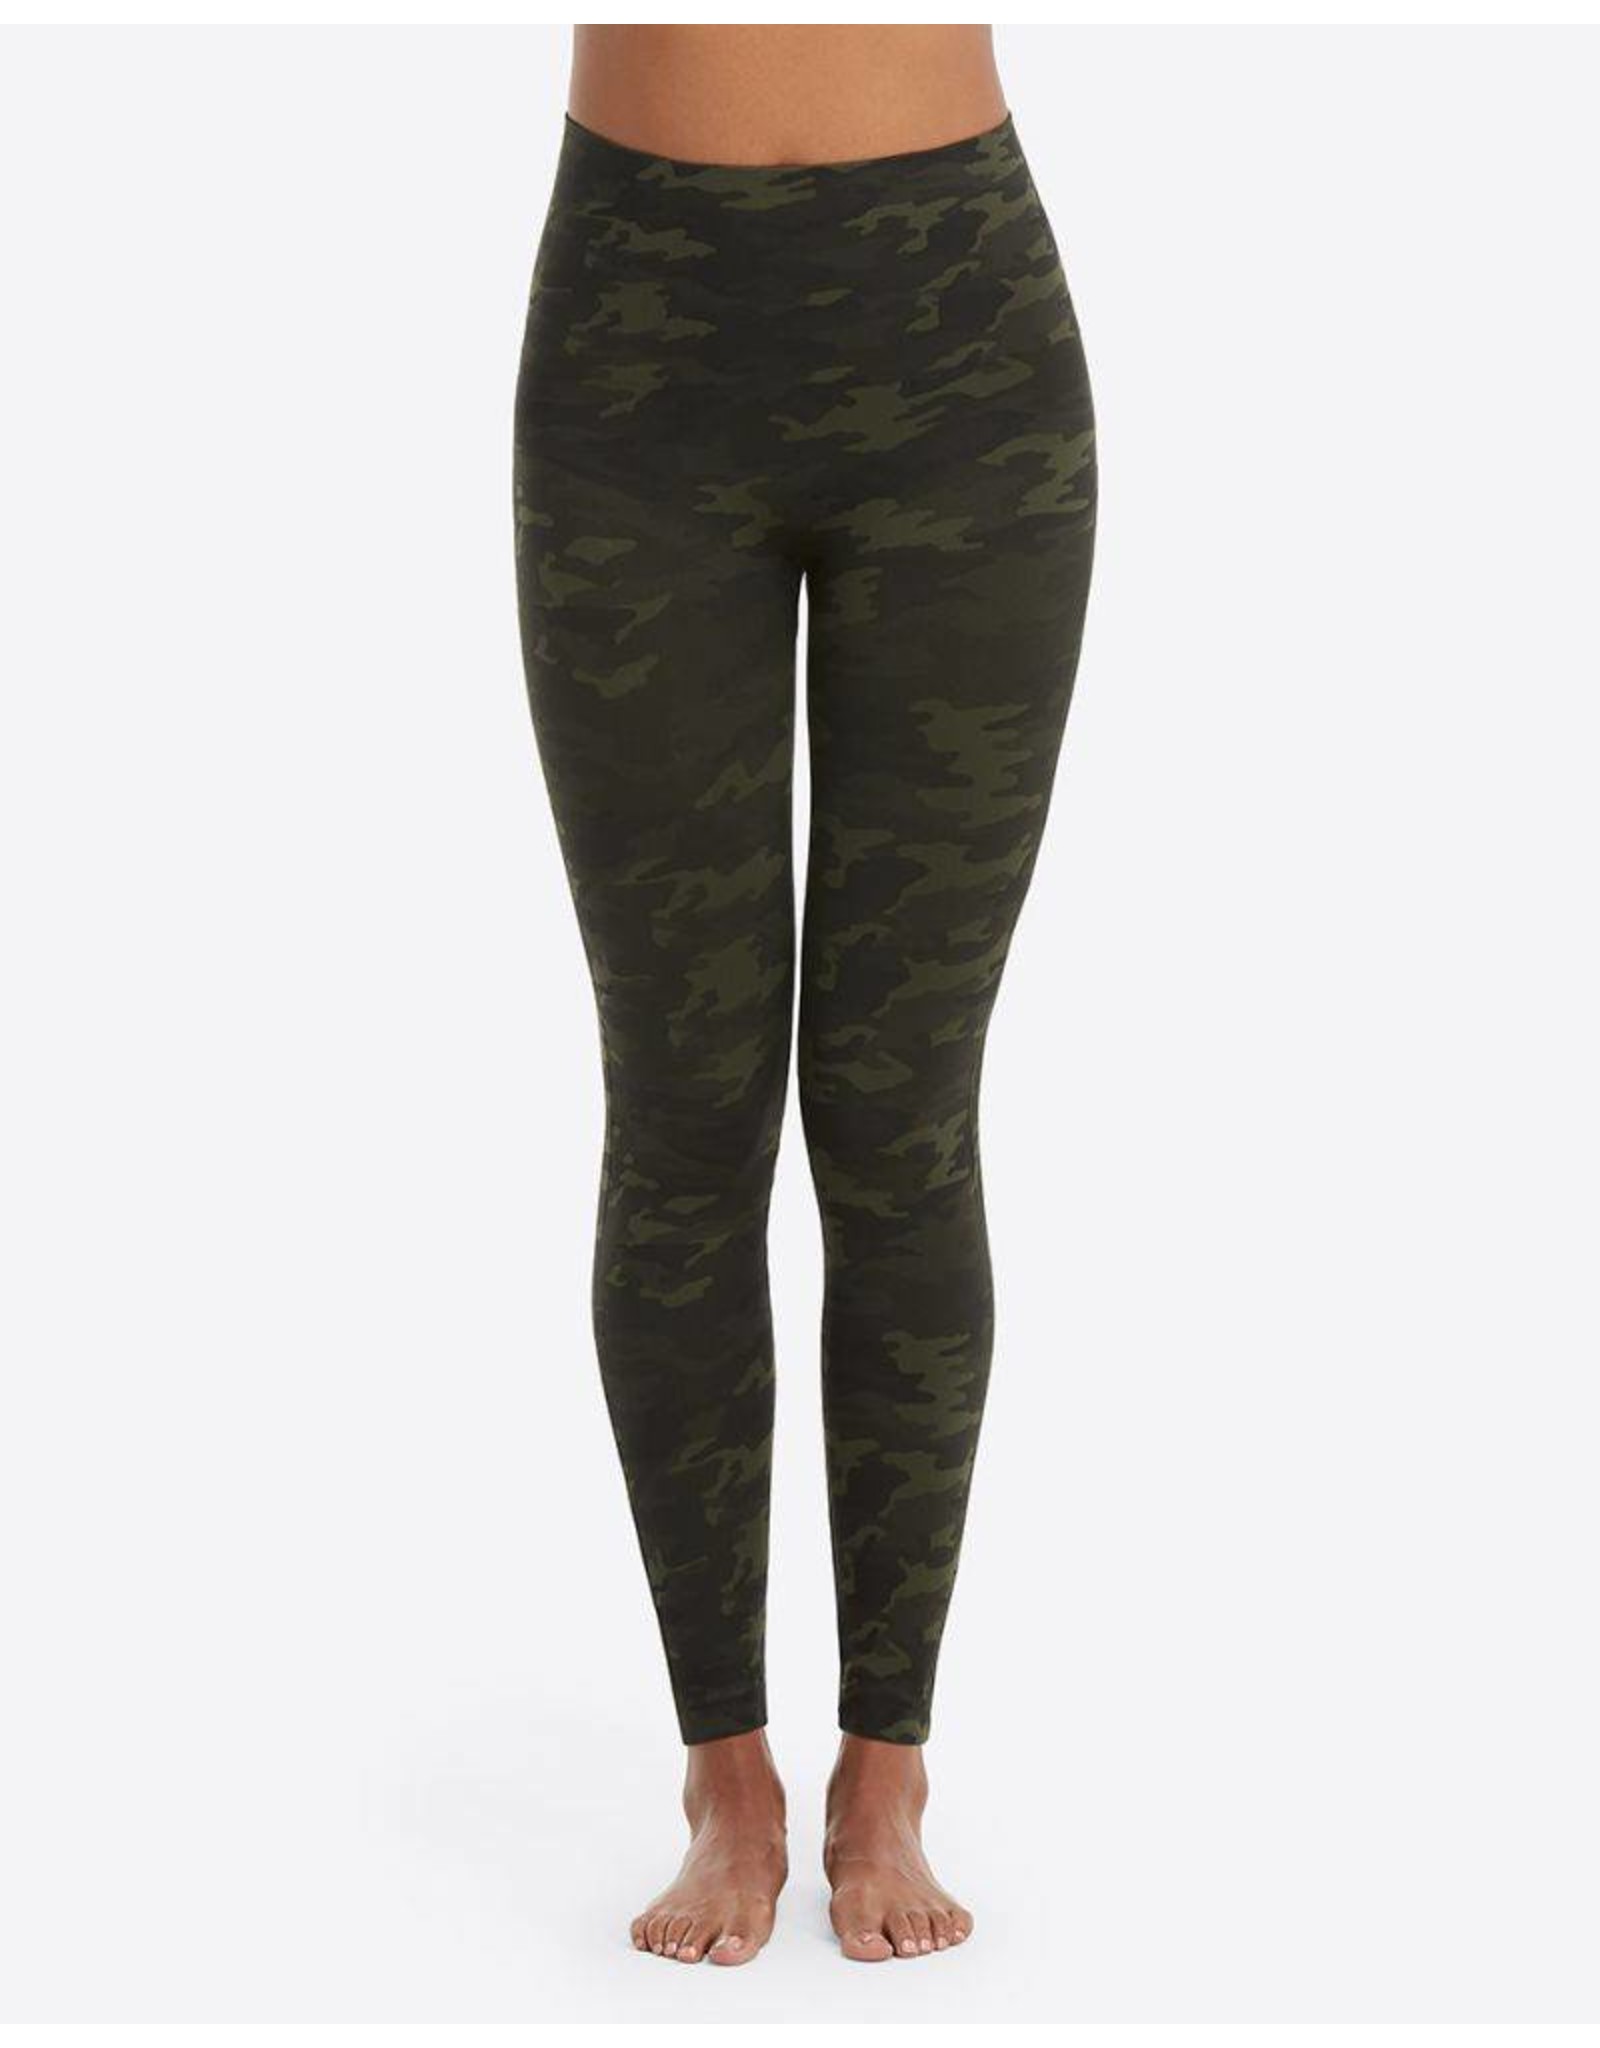 Girl in Camouflage Leggings Stock Image - Image of cloth, seamless